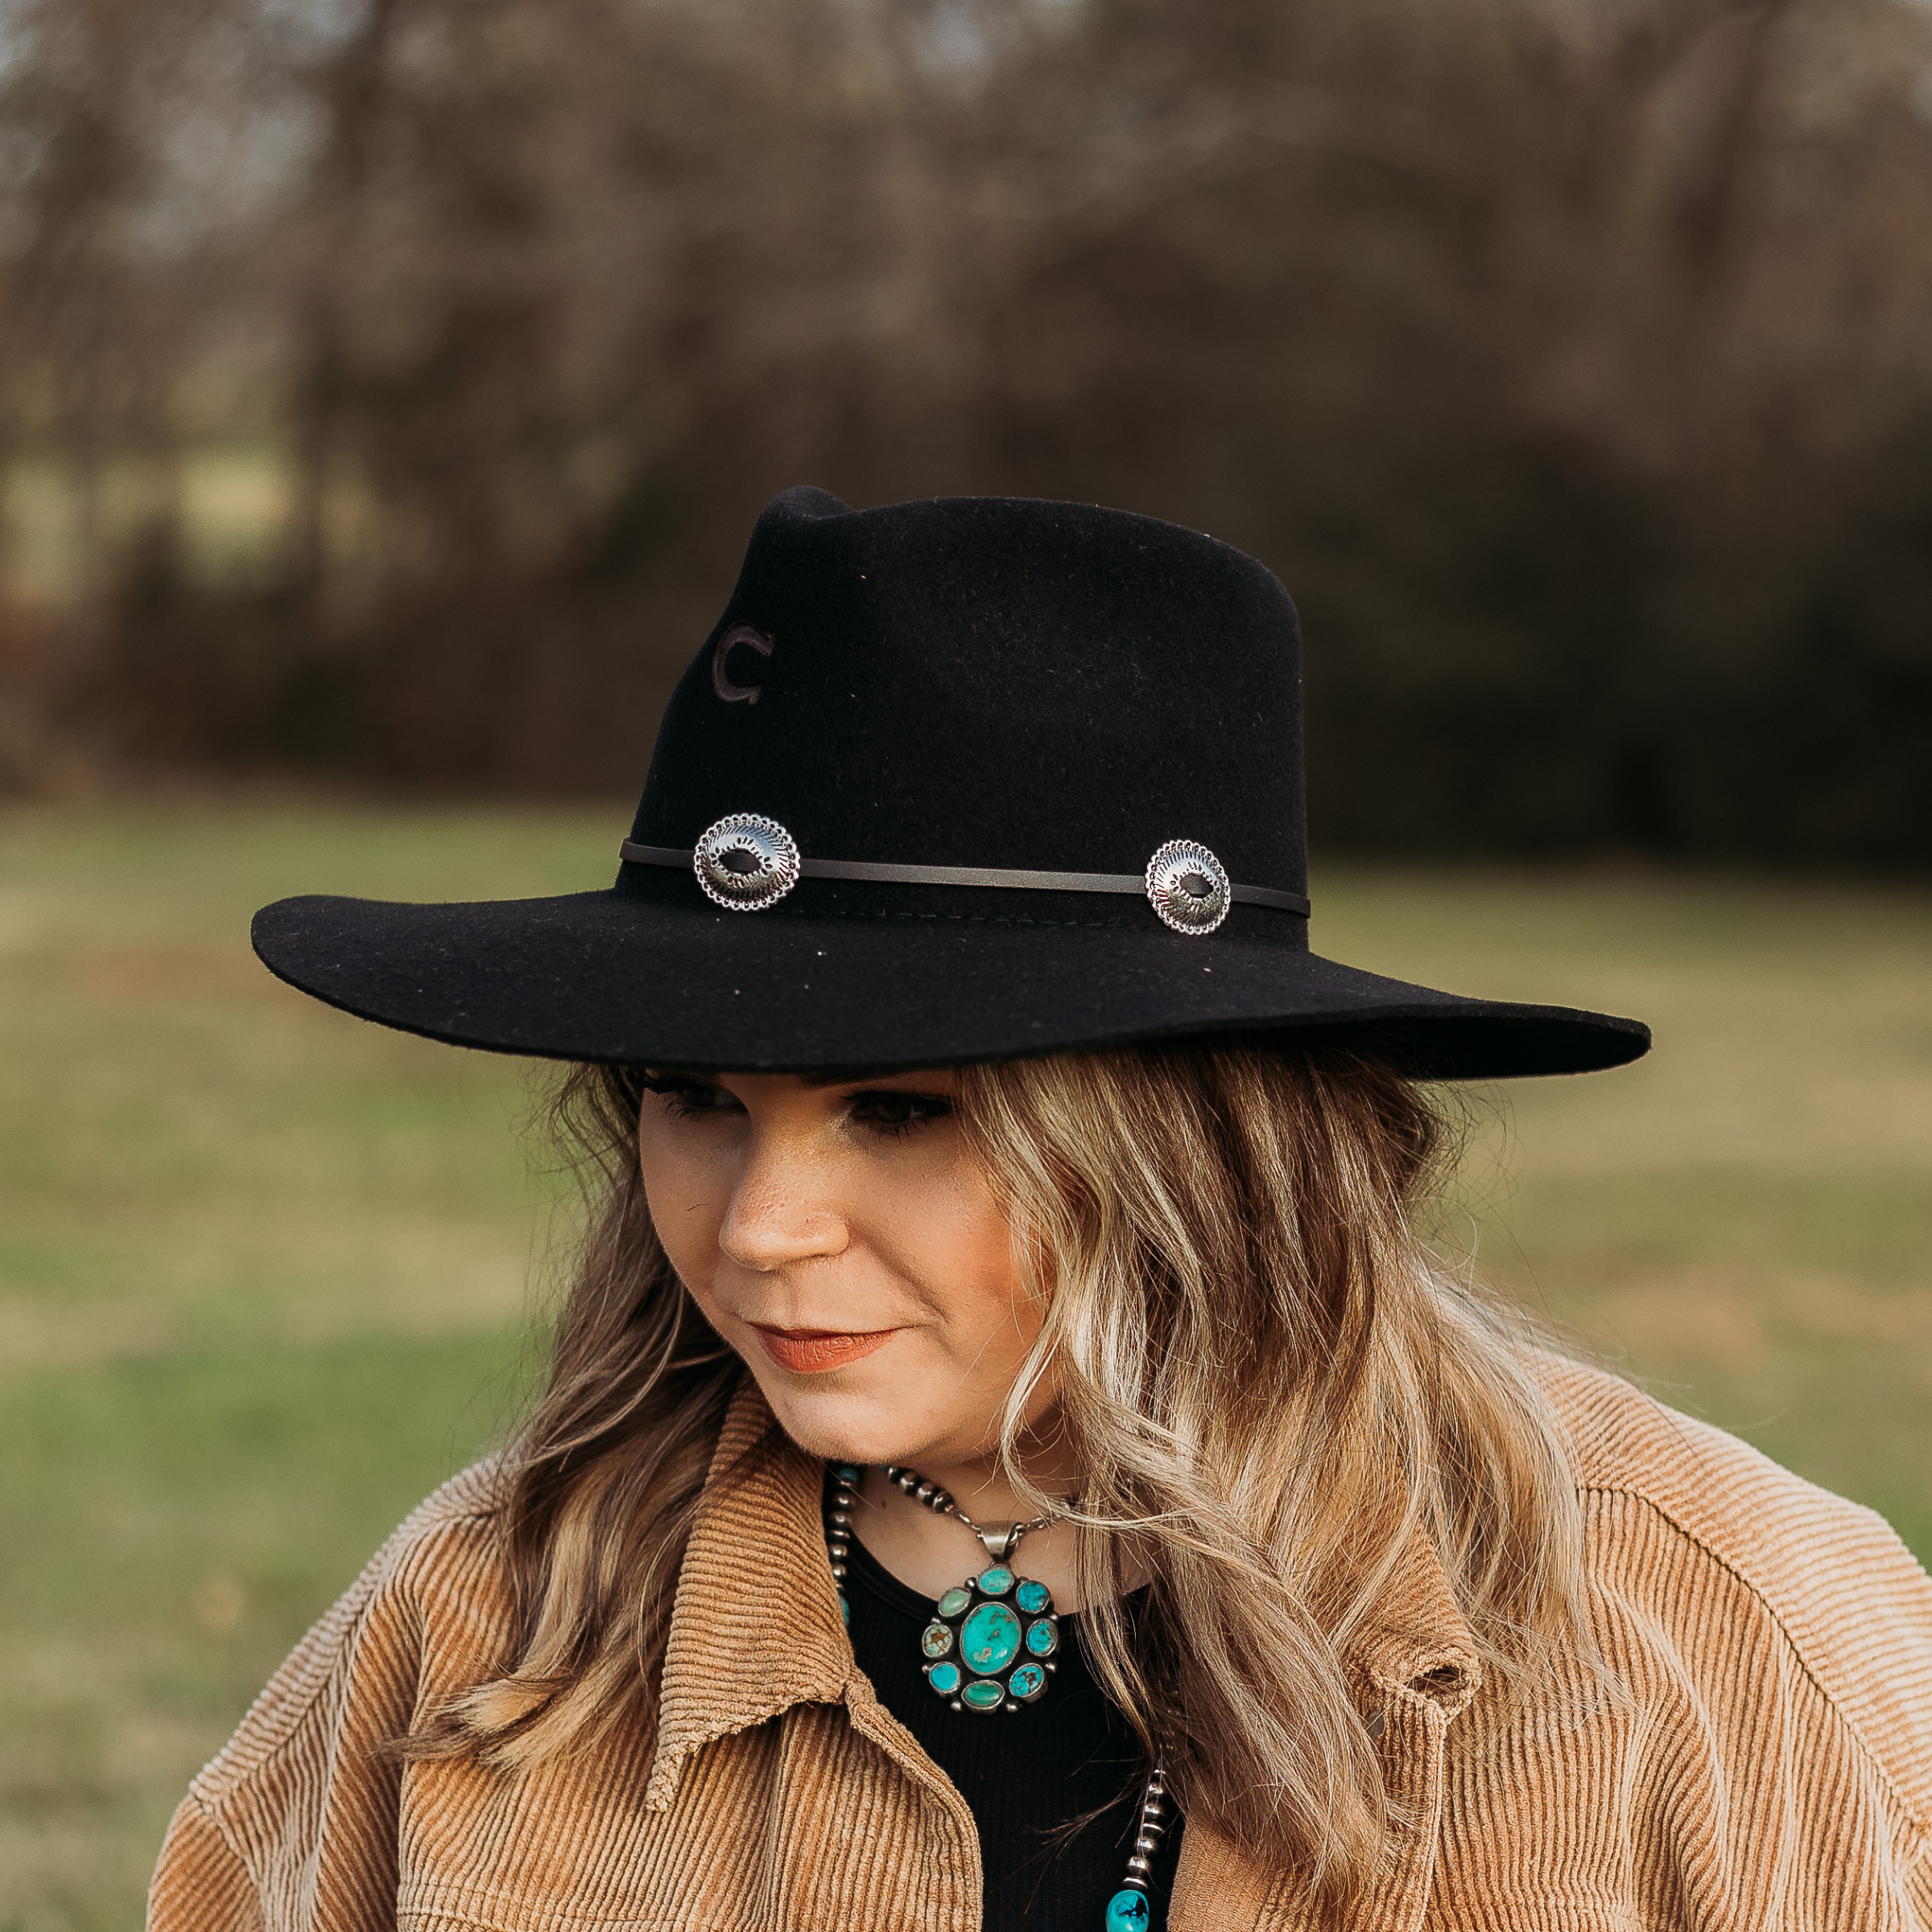 Black Felt Hat with Floppy Brim. Thin Black Leather Hat Band With Silver Conchos Along It. Model has it paired with a brown jacket and turquoise jewelry. Pictured on wooded background.